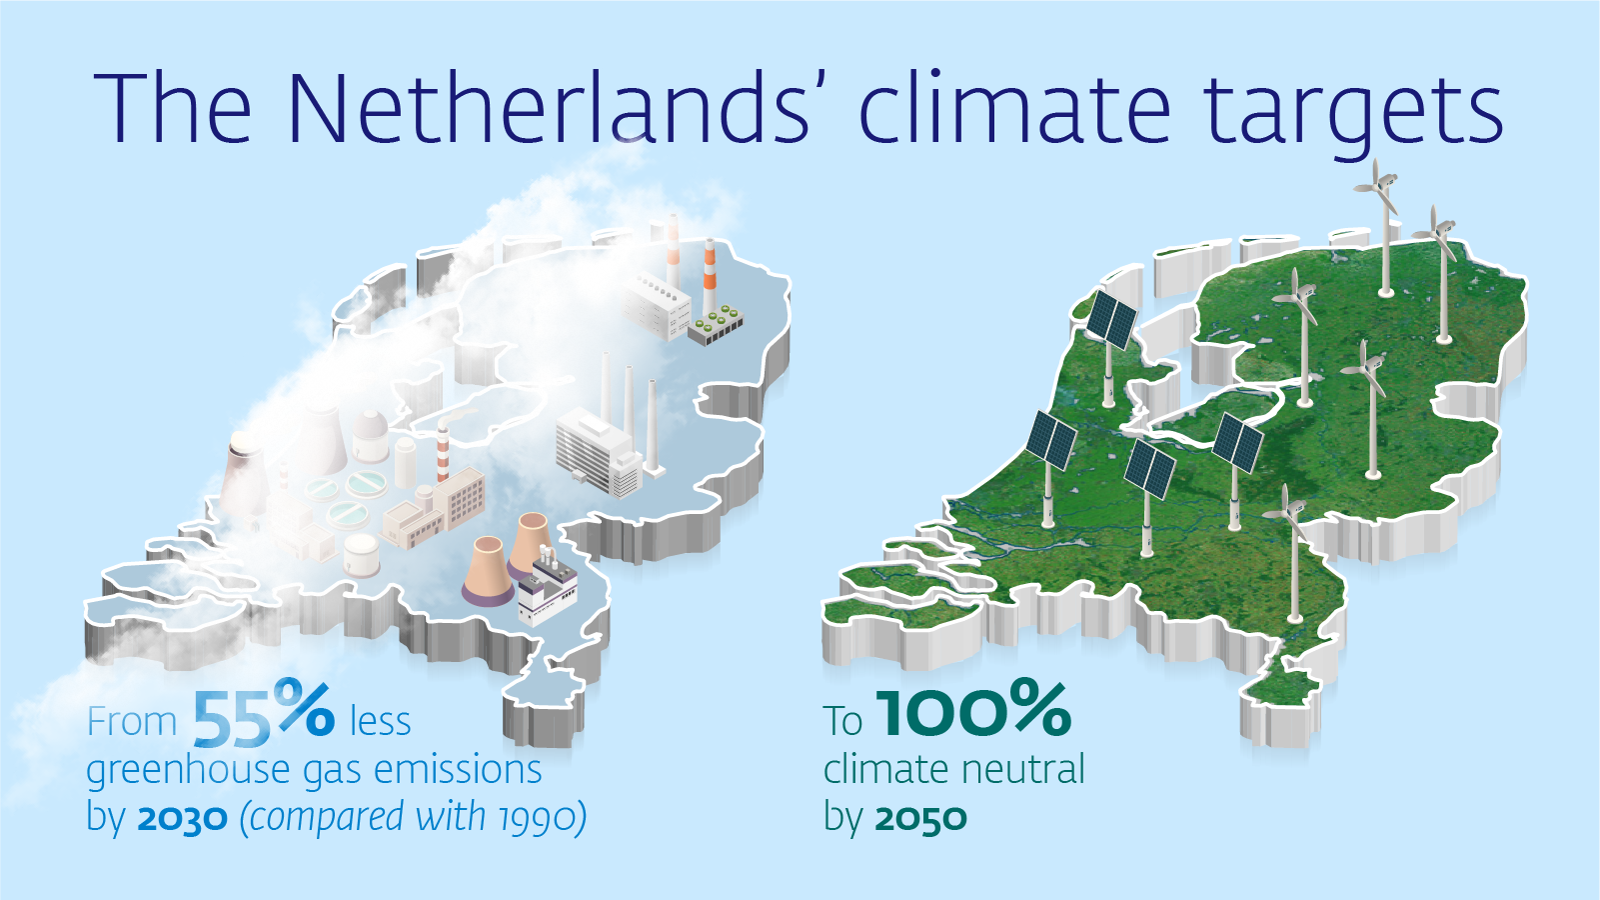 The Netherlands climate targets